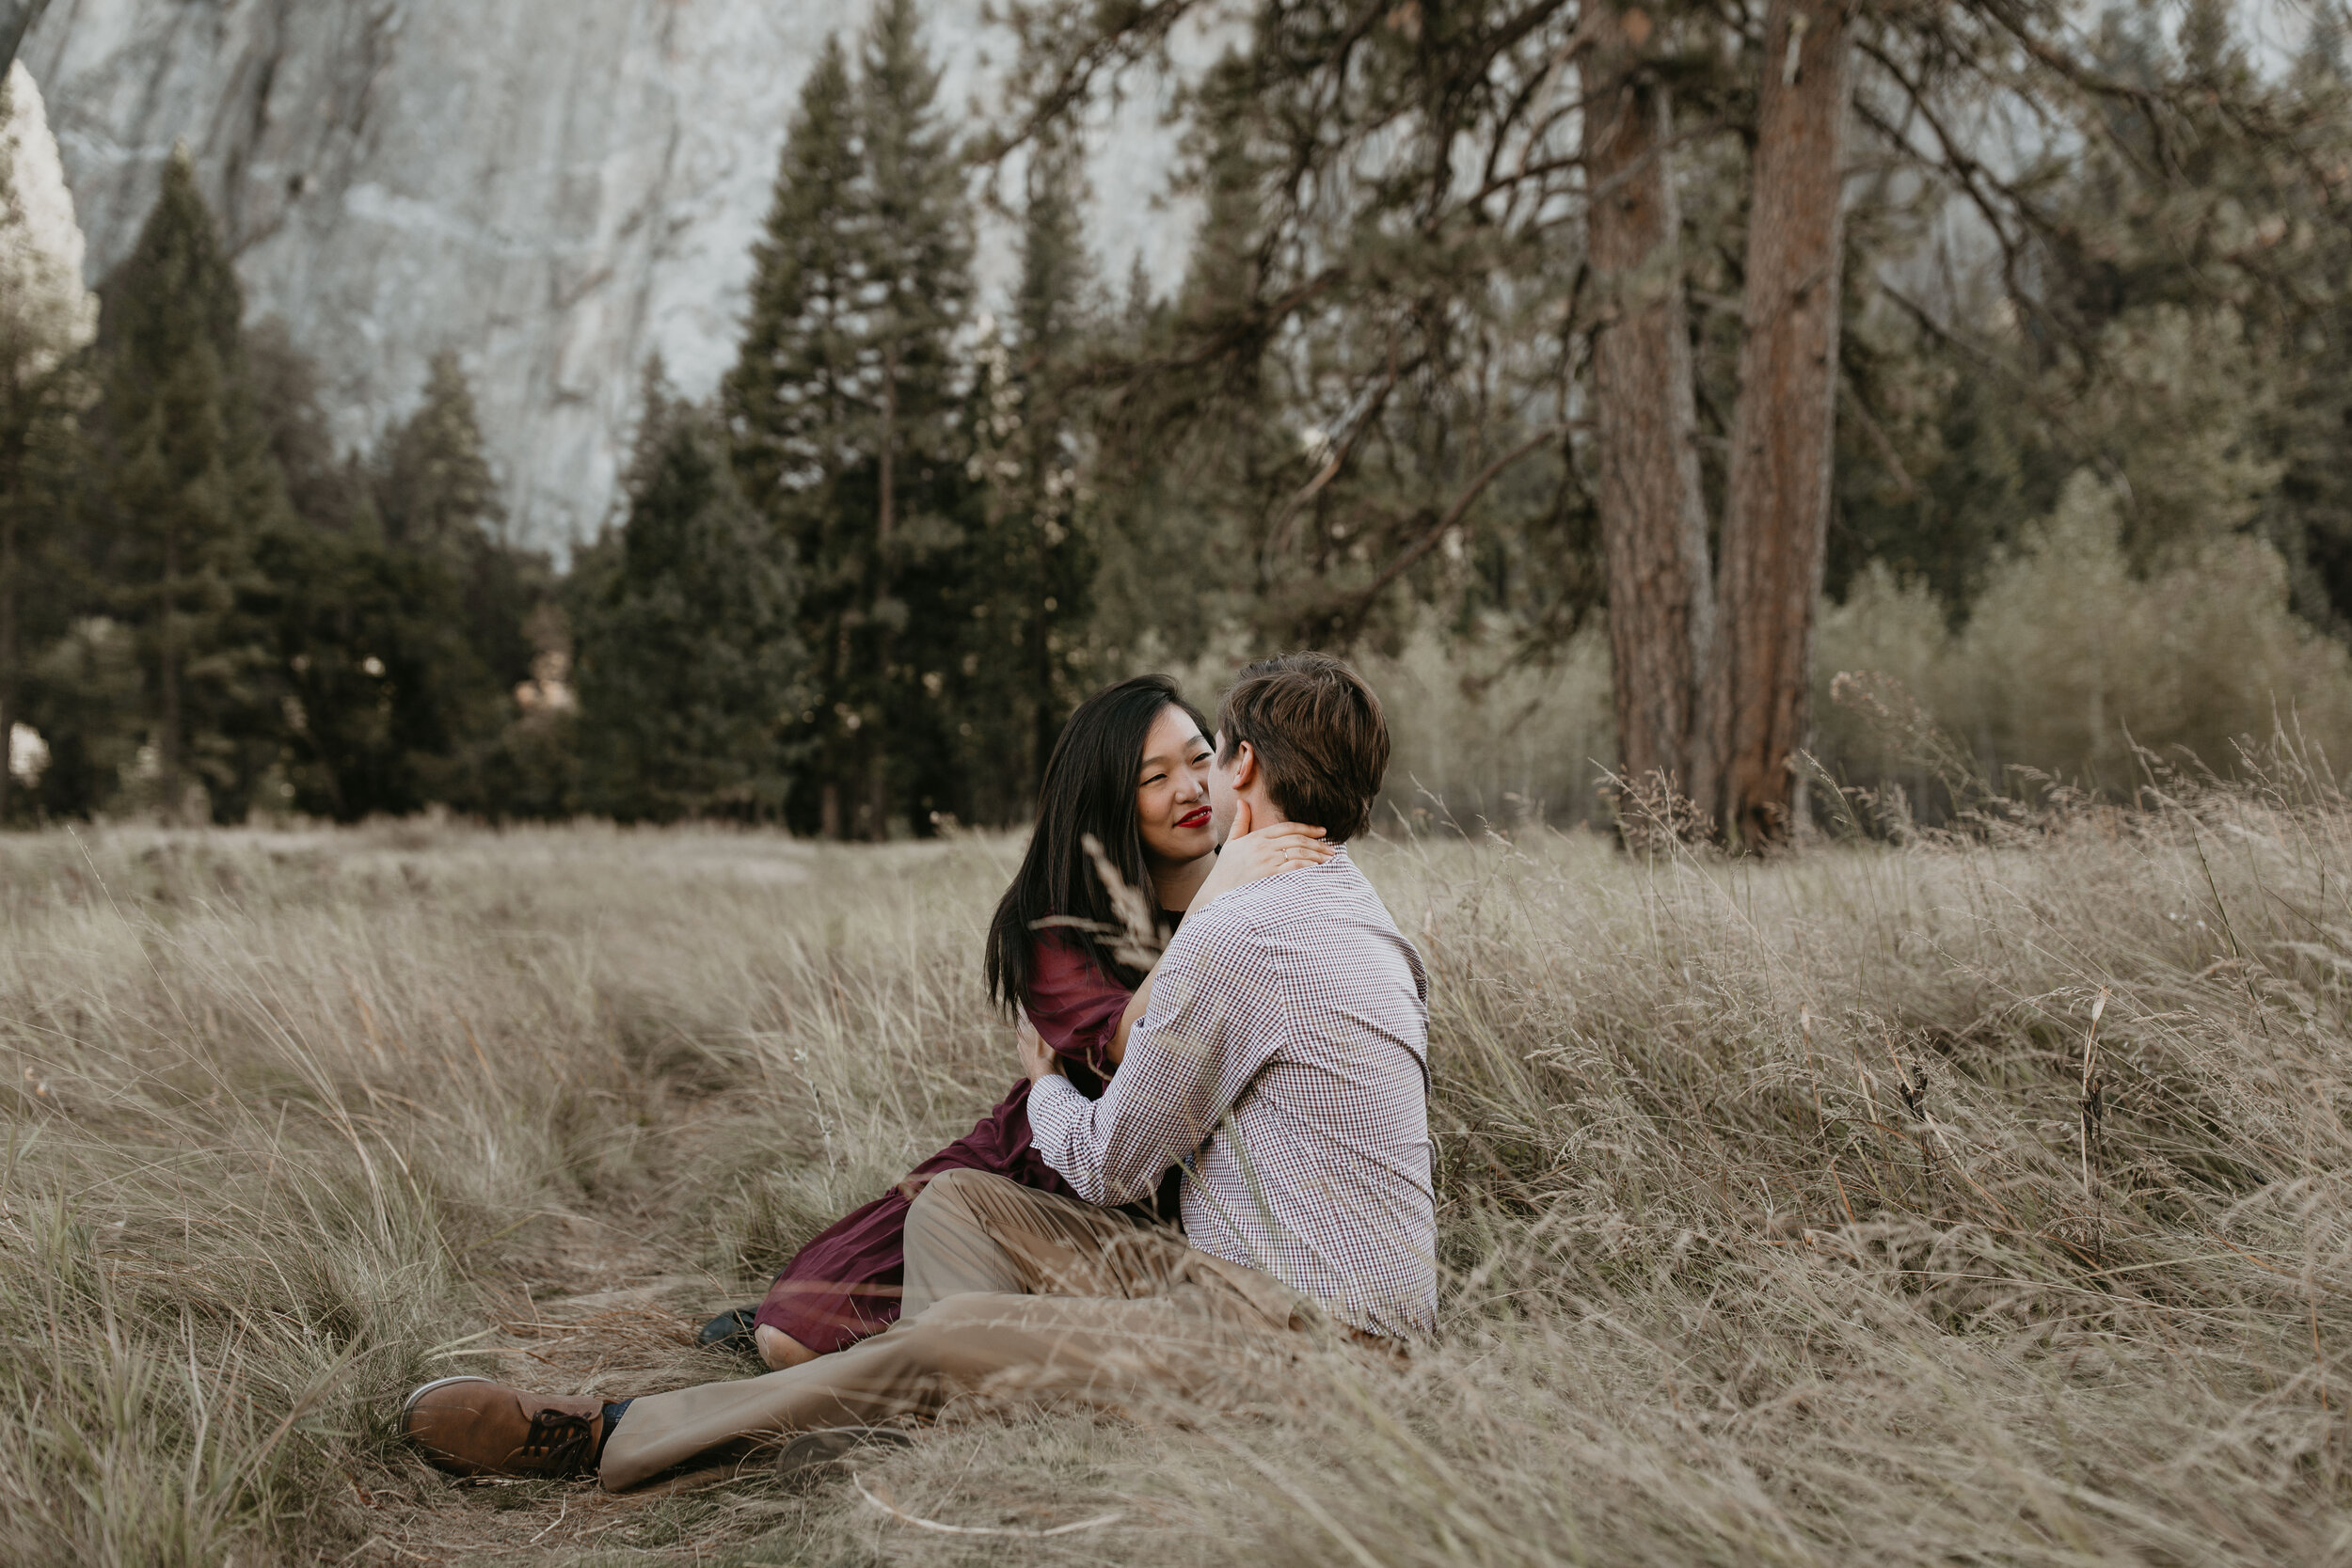 yosemite-national-park-couples-session-at-taft-point-and-yosemite-valley-yosemite-elopement-photographer-nicole-daacke-photography-110.jpg